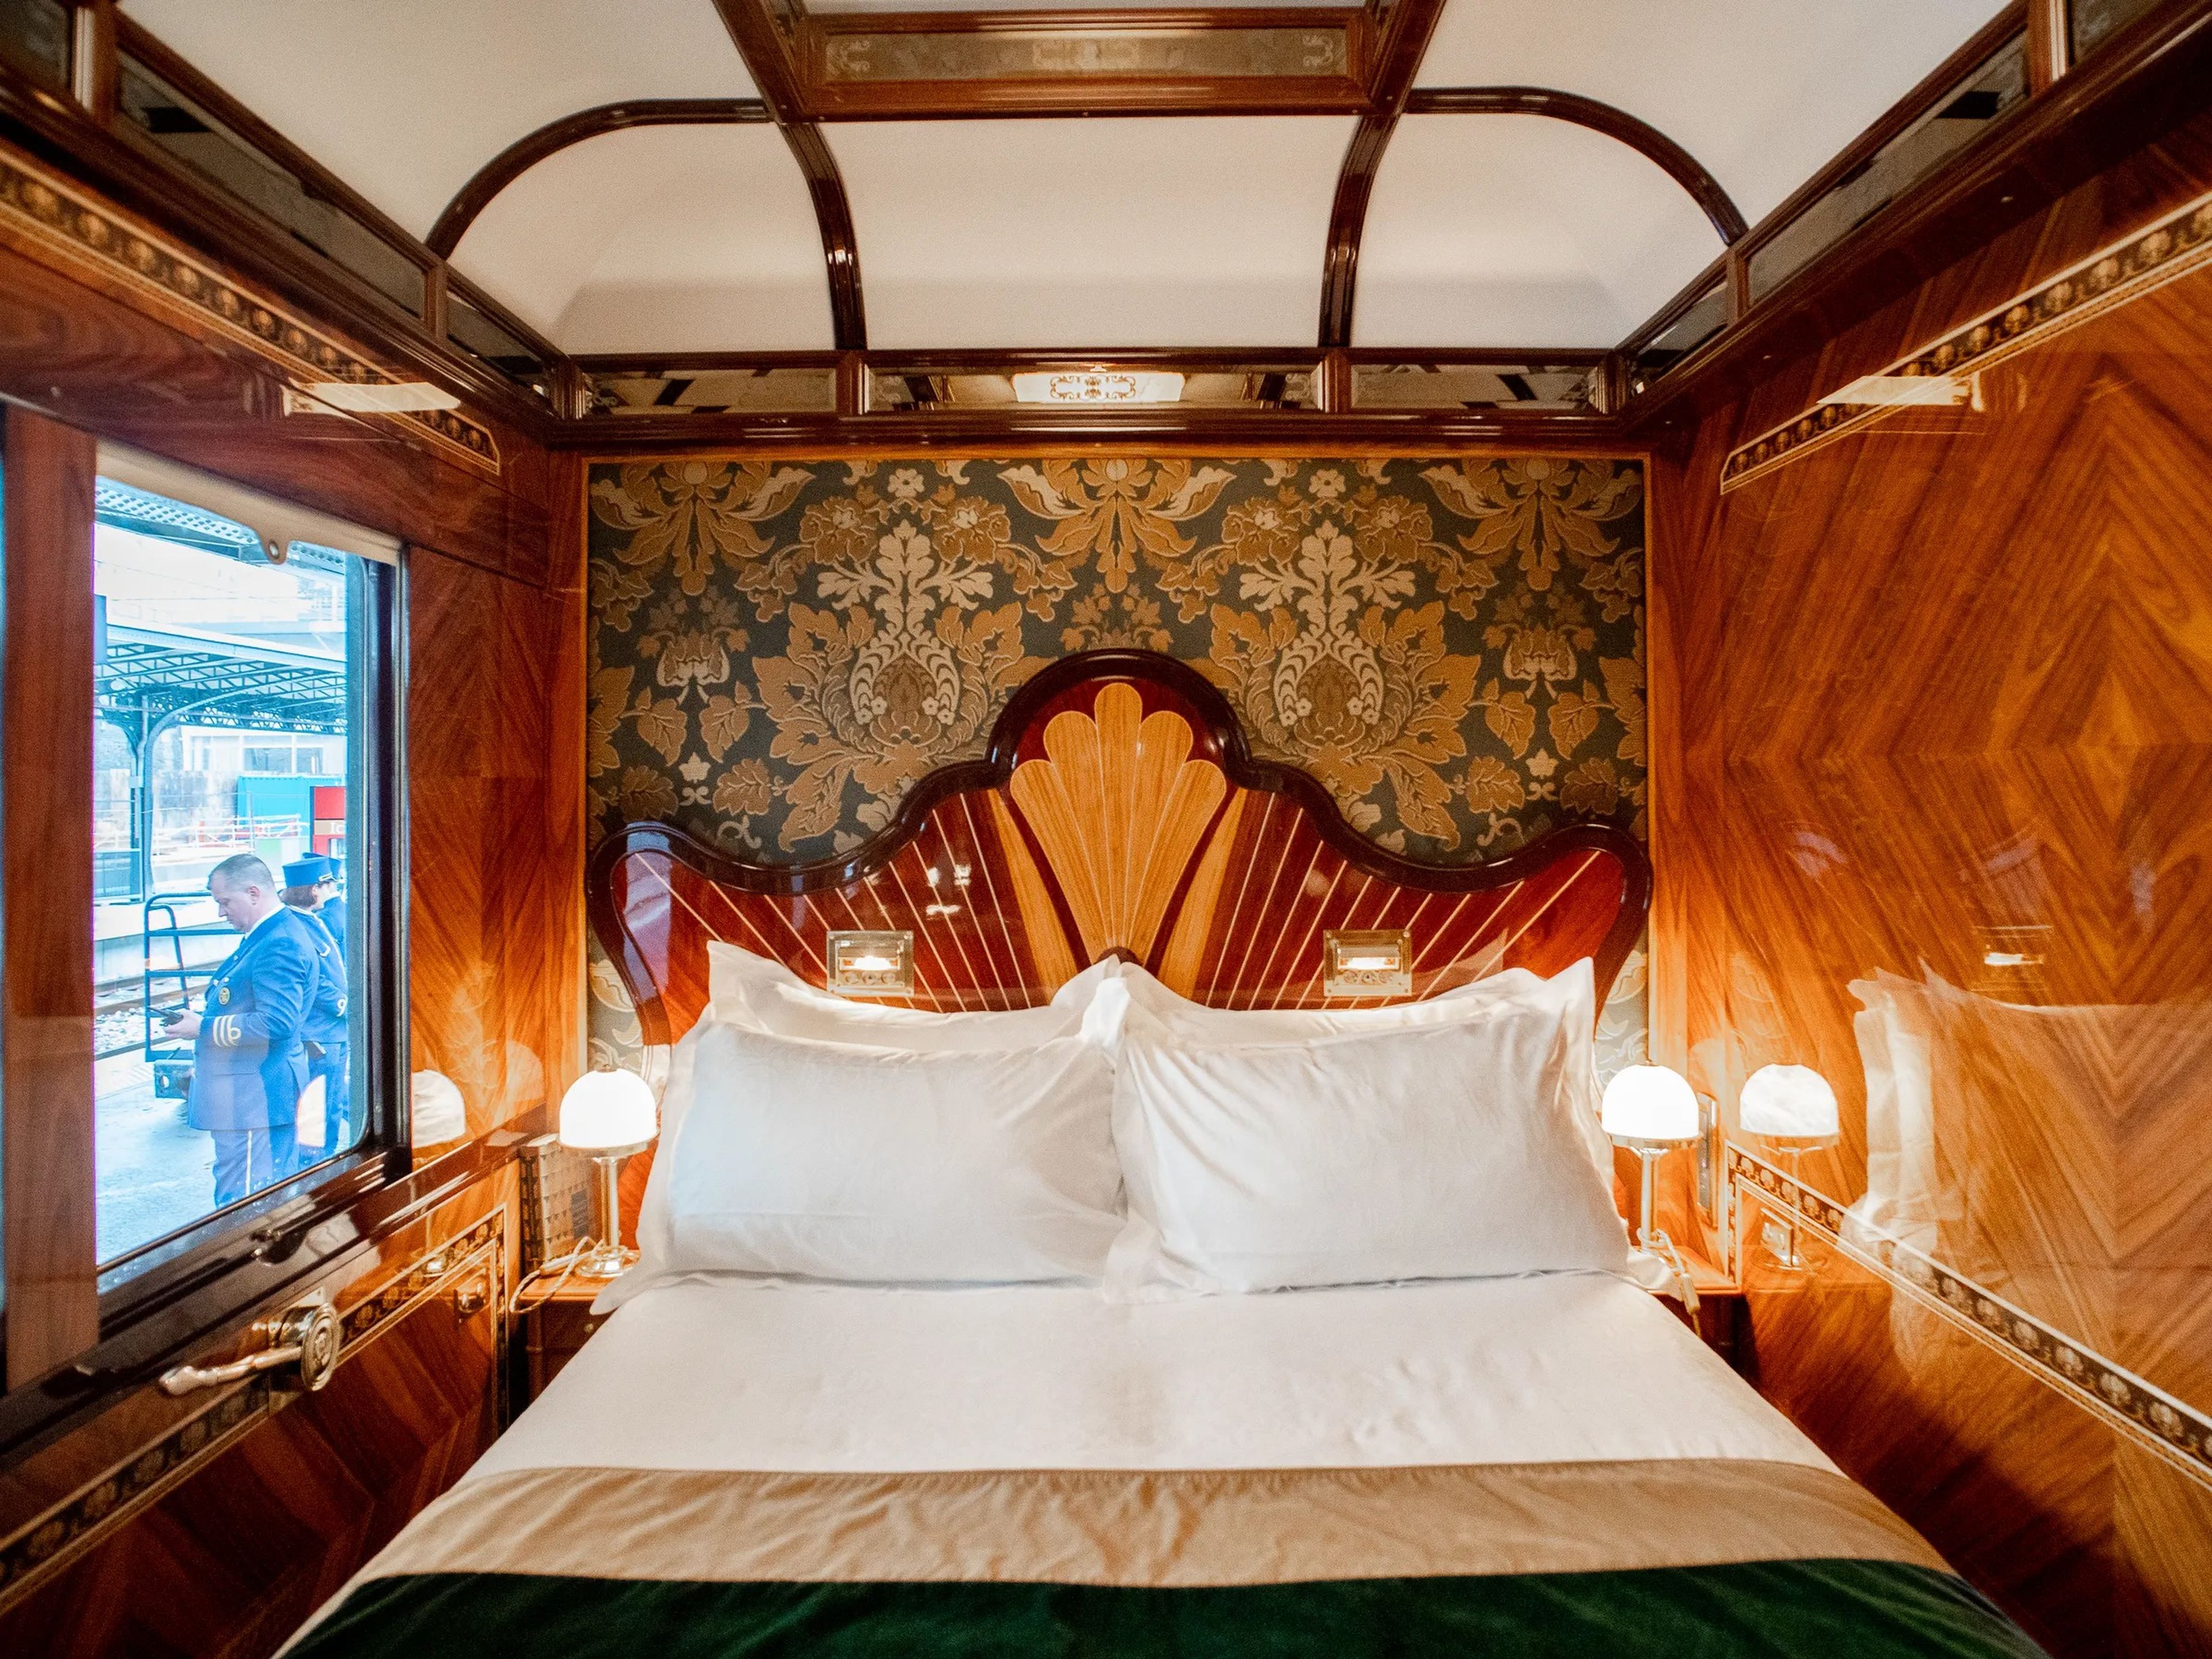 Inside a wood-walled train suite with white and green furnishings and a bed in the back center.